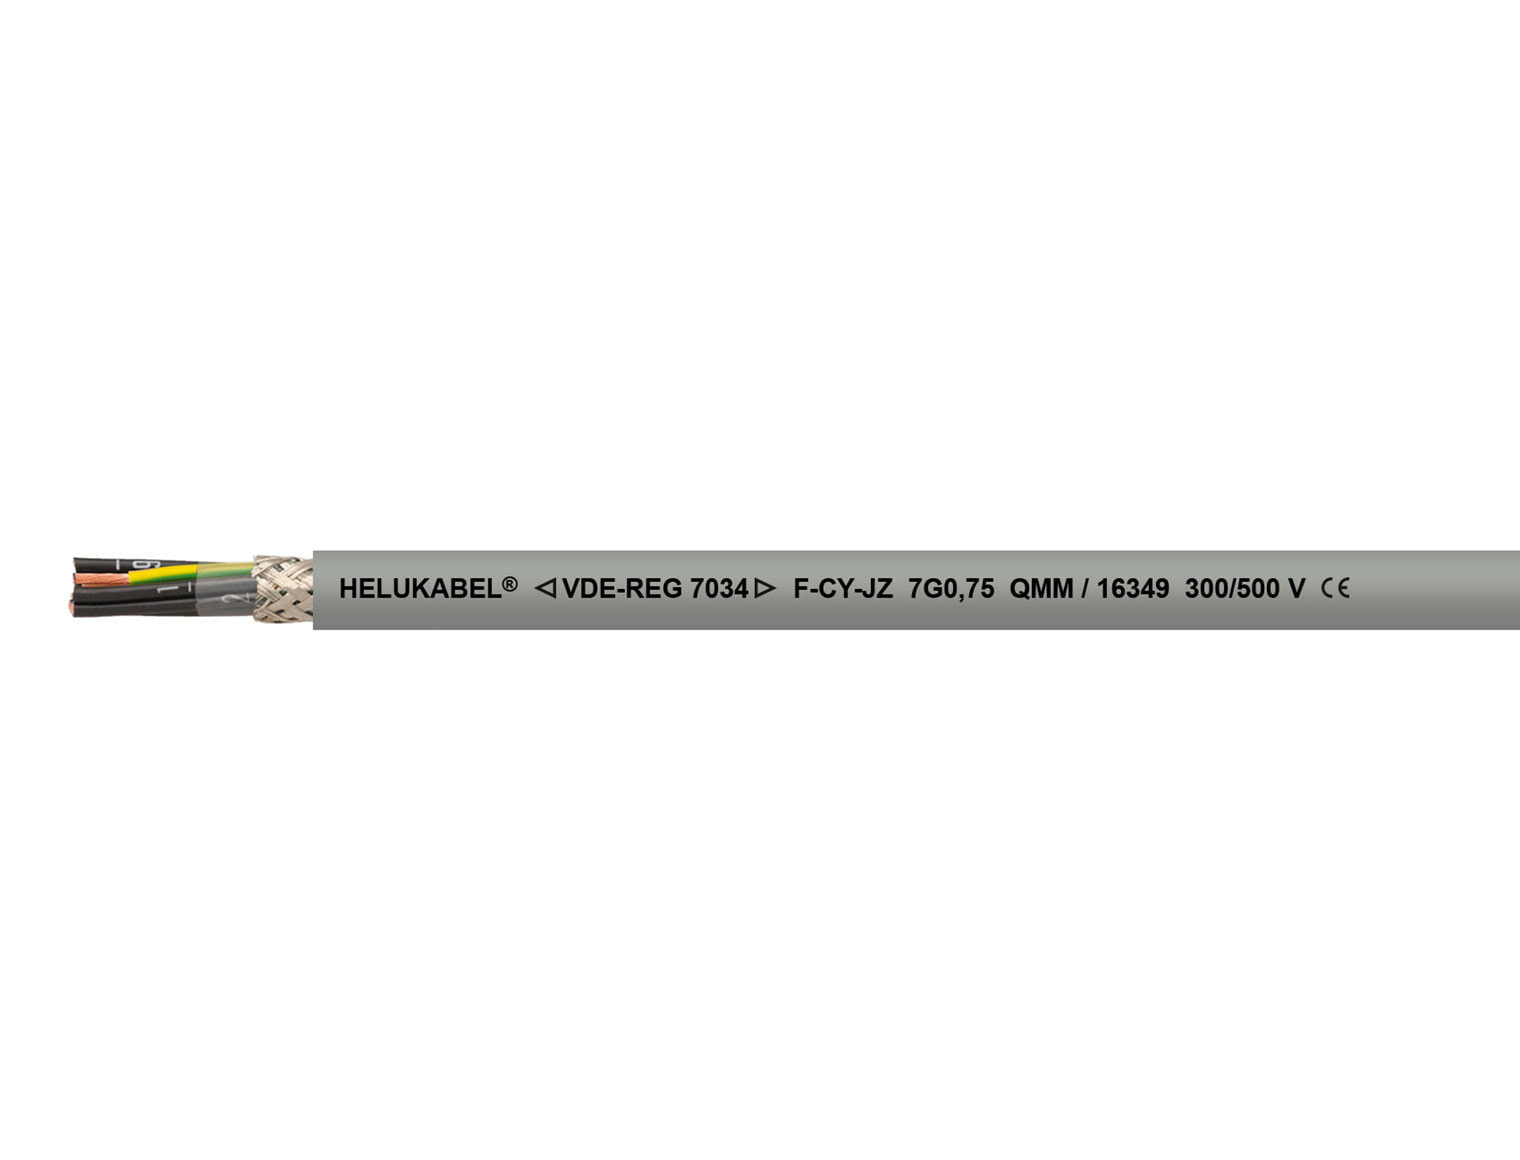 Helukabel HELU F-CY-OZ 5x0,7516561 - Low voltage cable - Grey - Polyvinyl chloride (PVC) - Polyvinyl chloride (PVC) - Cooper - -10 - 80 °C